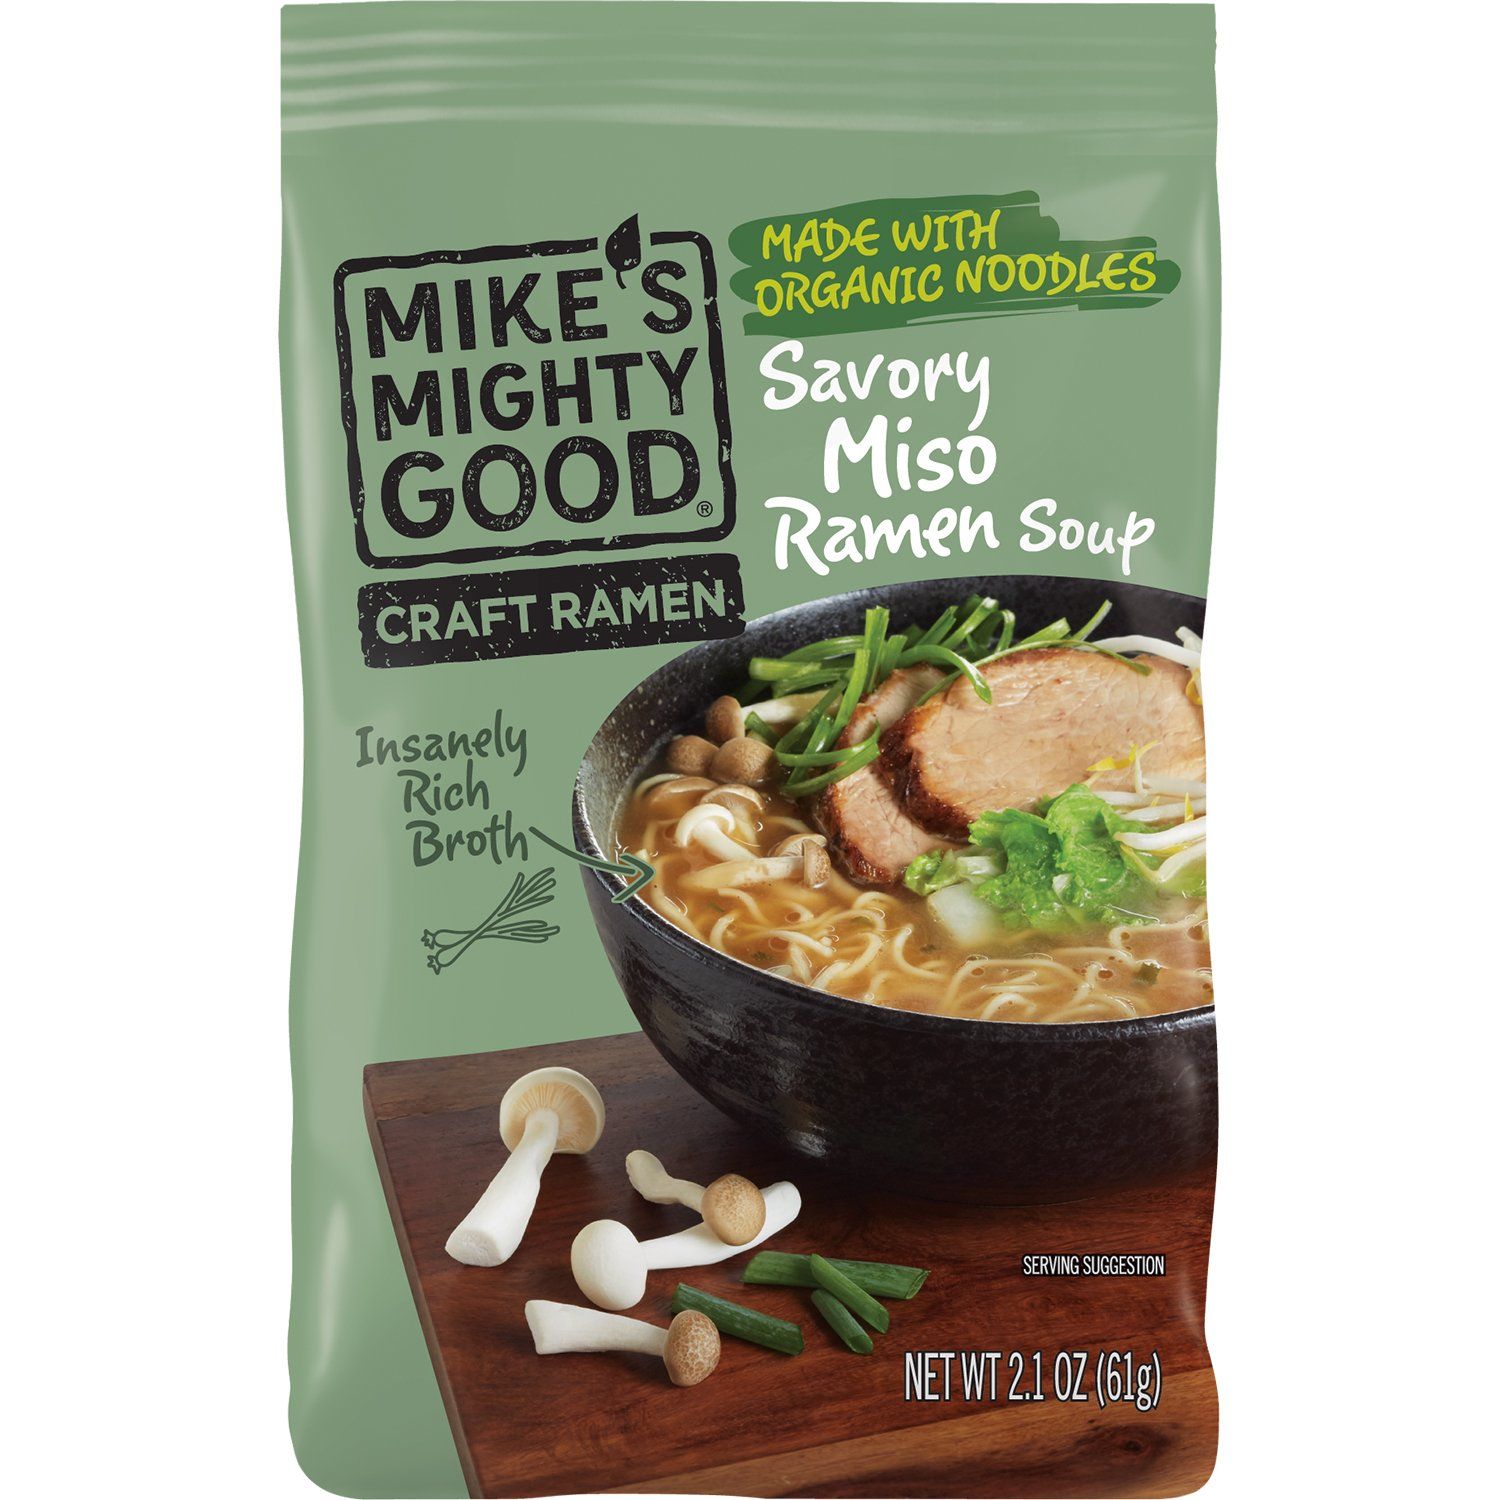 Mike's Mighty Good Craft Ramen Soup Mike's Mighty Good Savory Miso 2.1 Ounce 